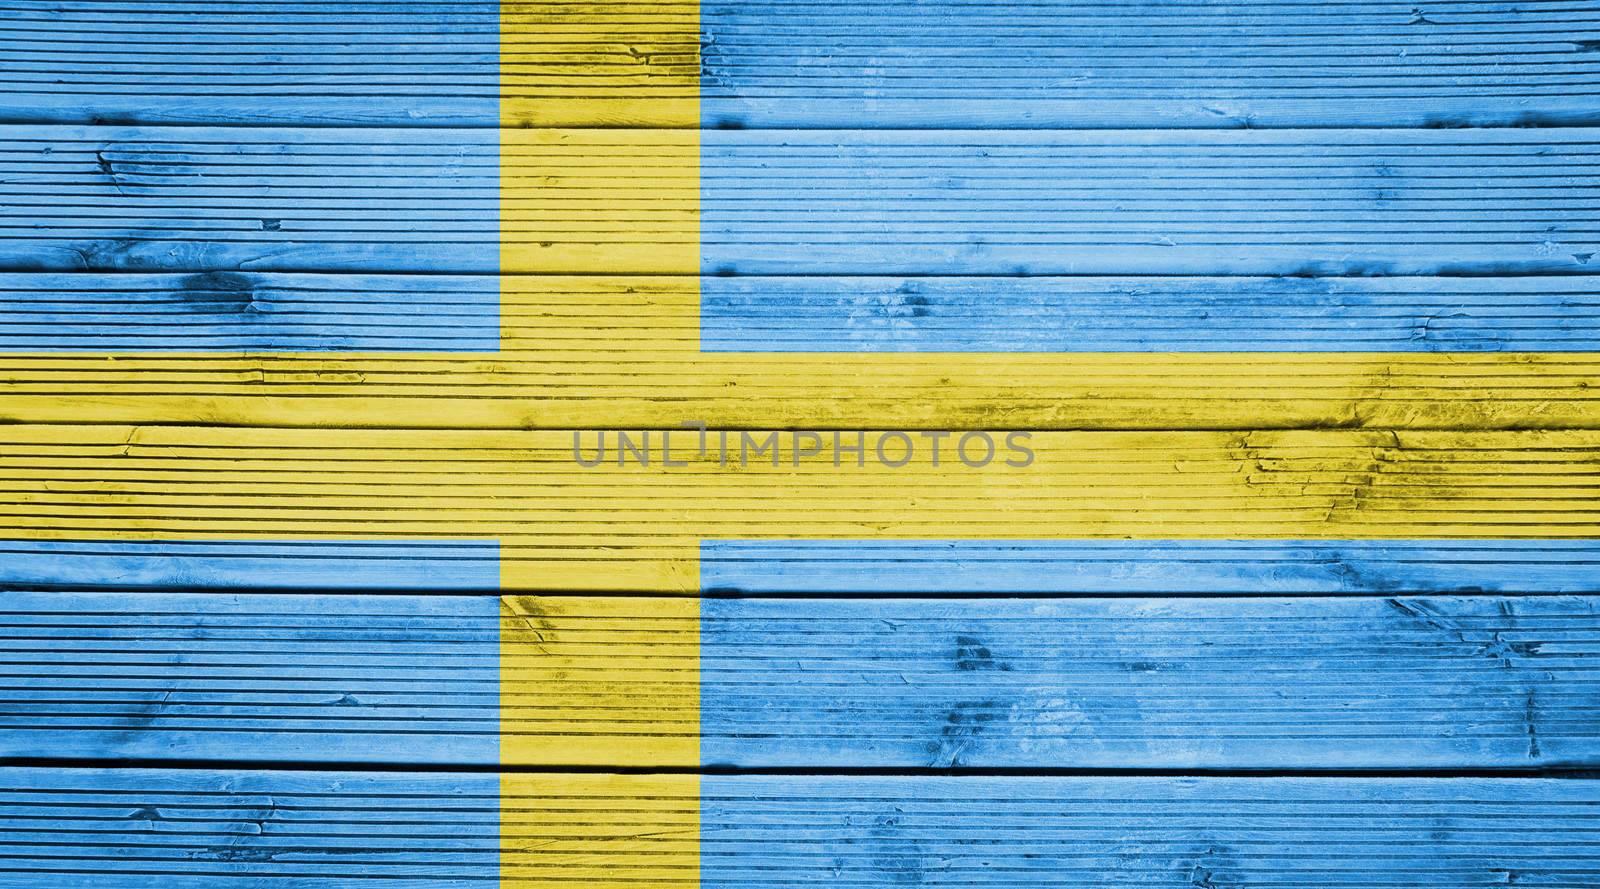 Natural wood planks texture background with the colors of the flag of Sweden